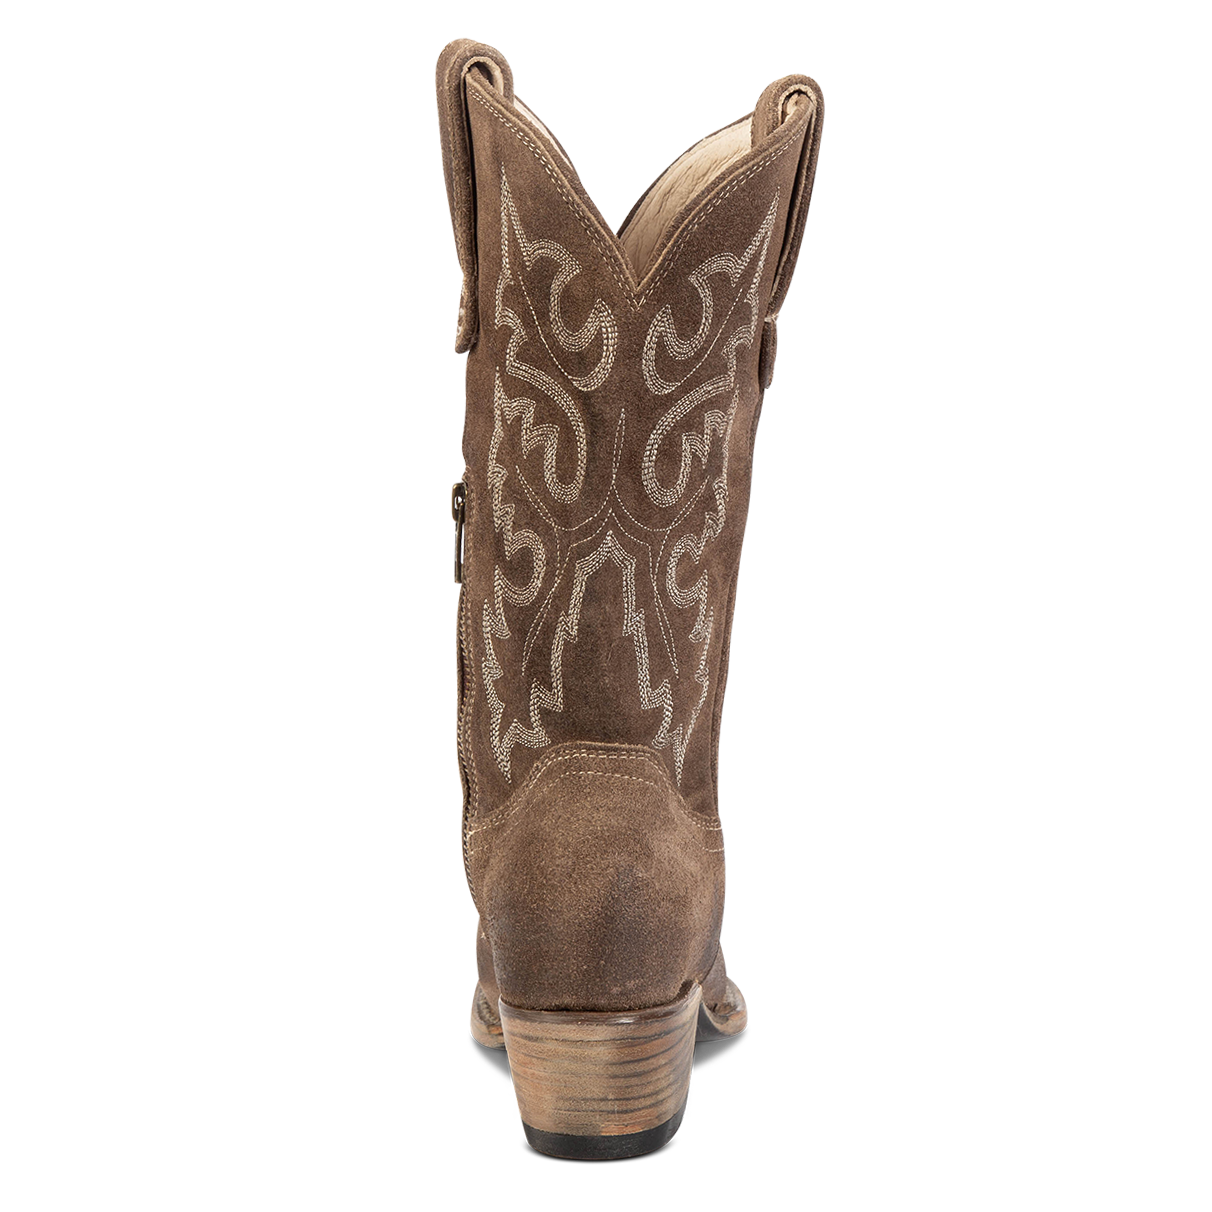 Back view showing intricate stitching and low heel on FREEBIRD women's Wilson grey suede western boot